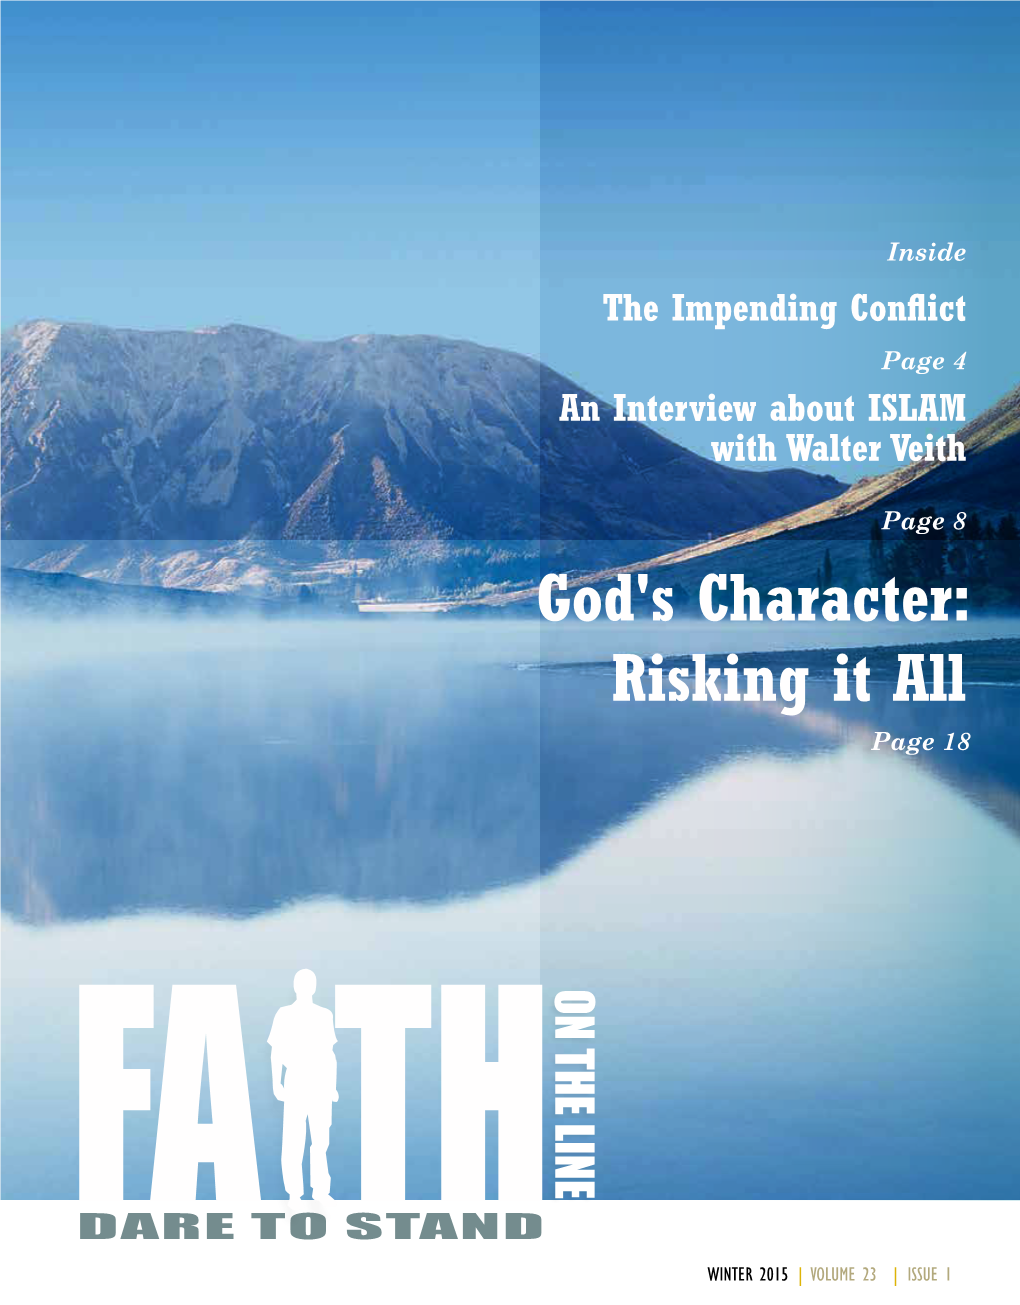 God's Character: Risking It All Page 18 on the LINE